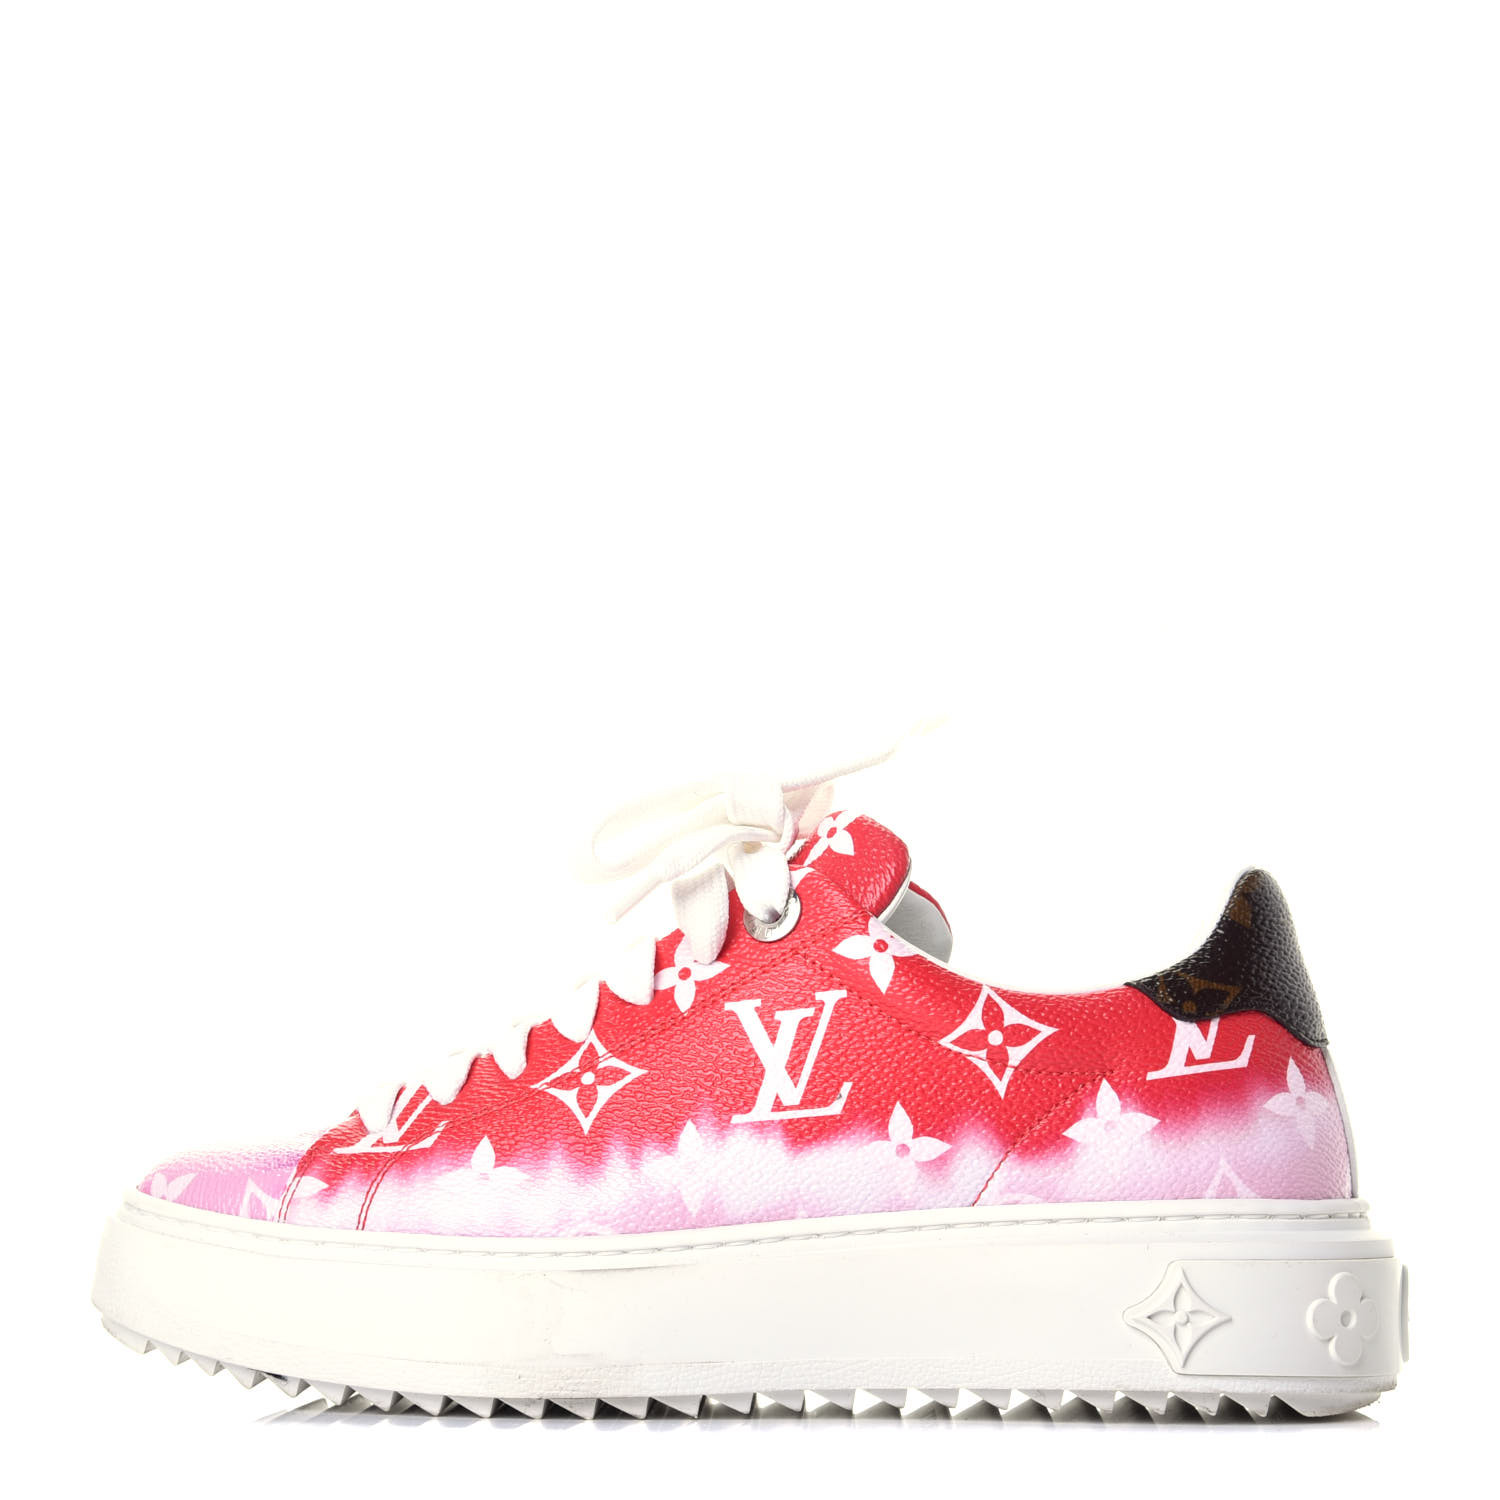 VUITTON Monogram Time Out Sneakers 35.5 Red 739928 | FASHIONPHILE